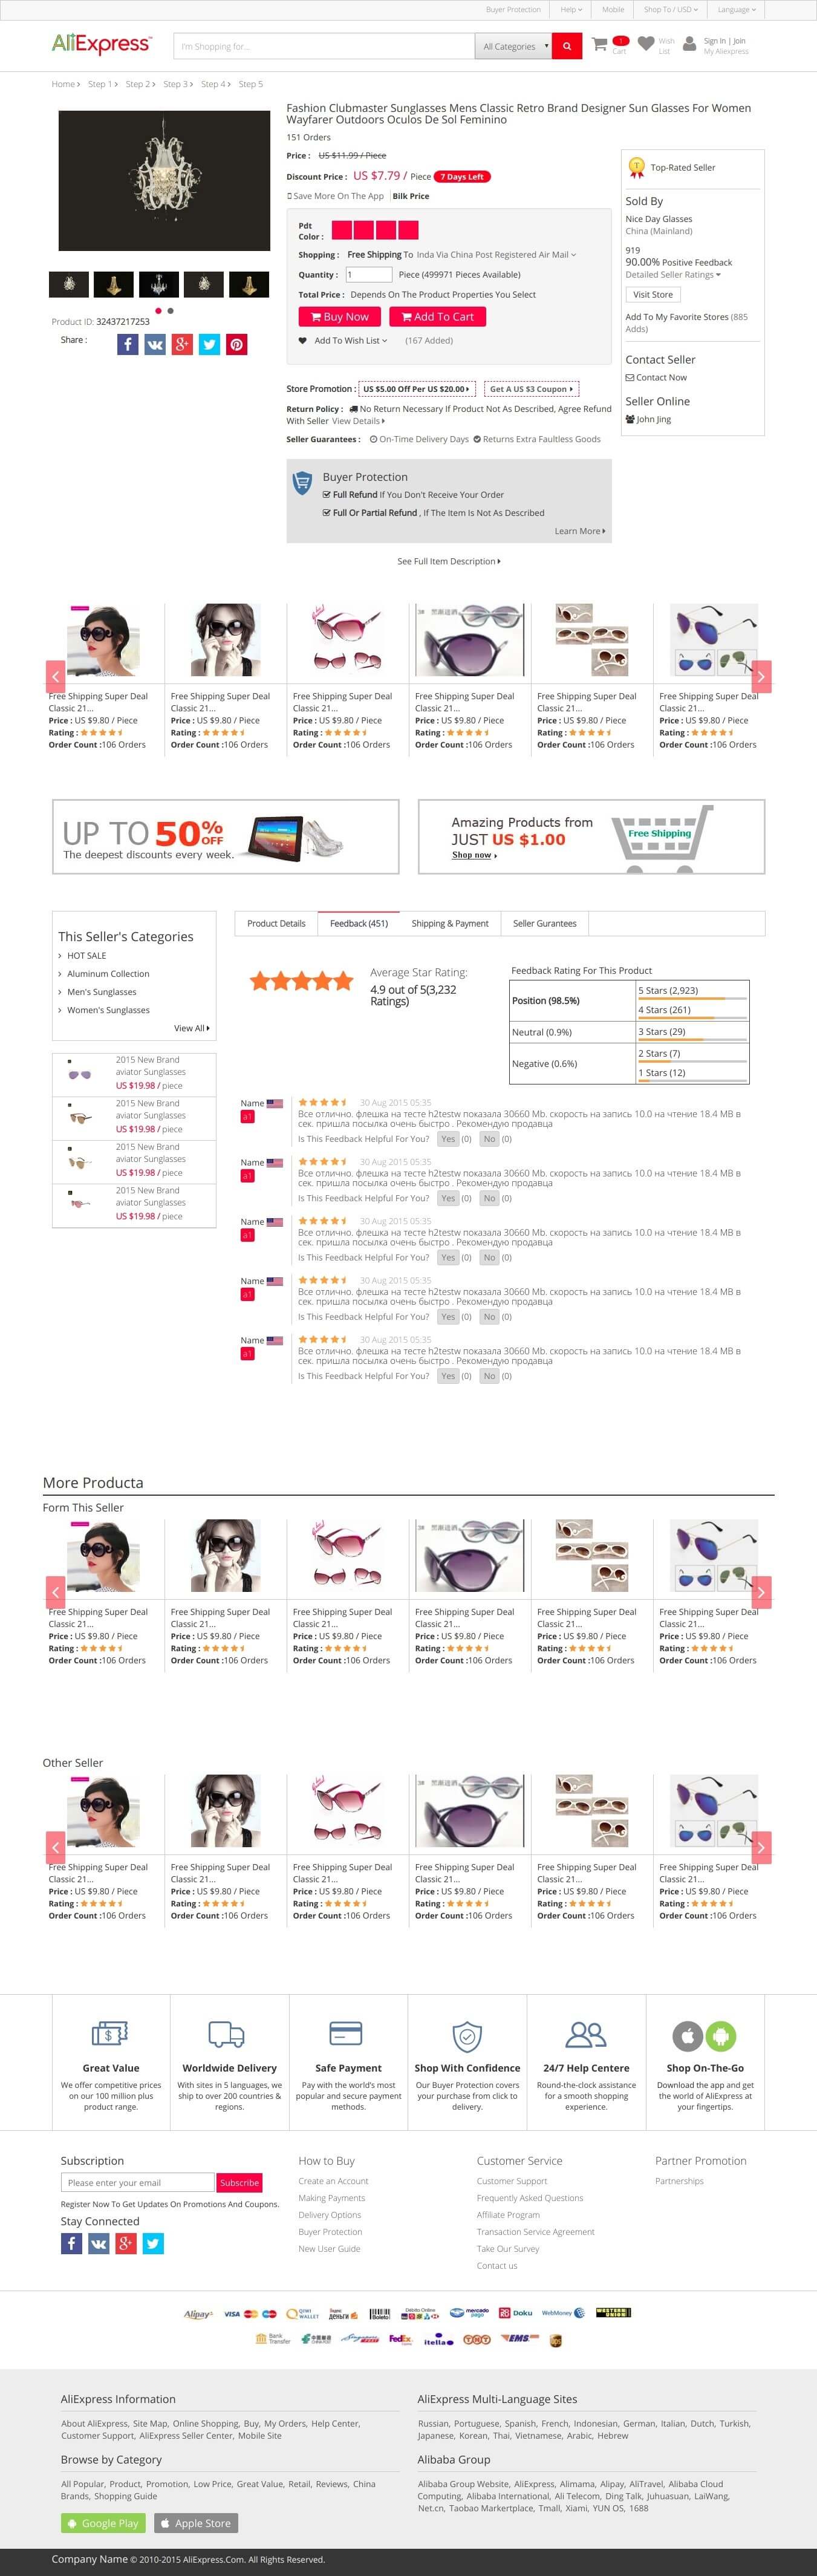 Product page Design with Feedback Tab - View image in New Tab for large experience